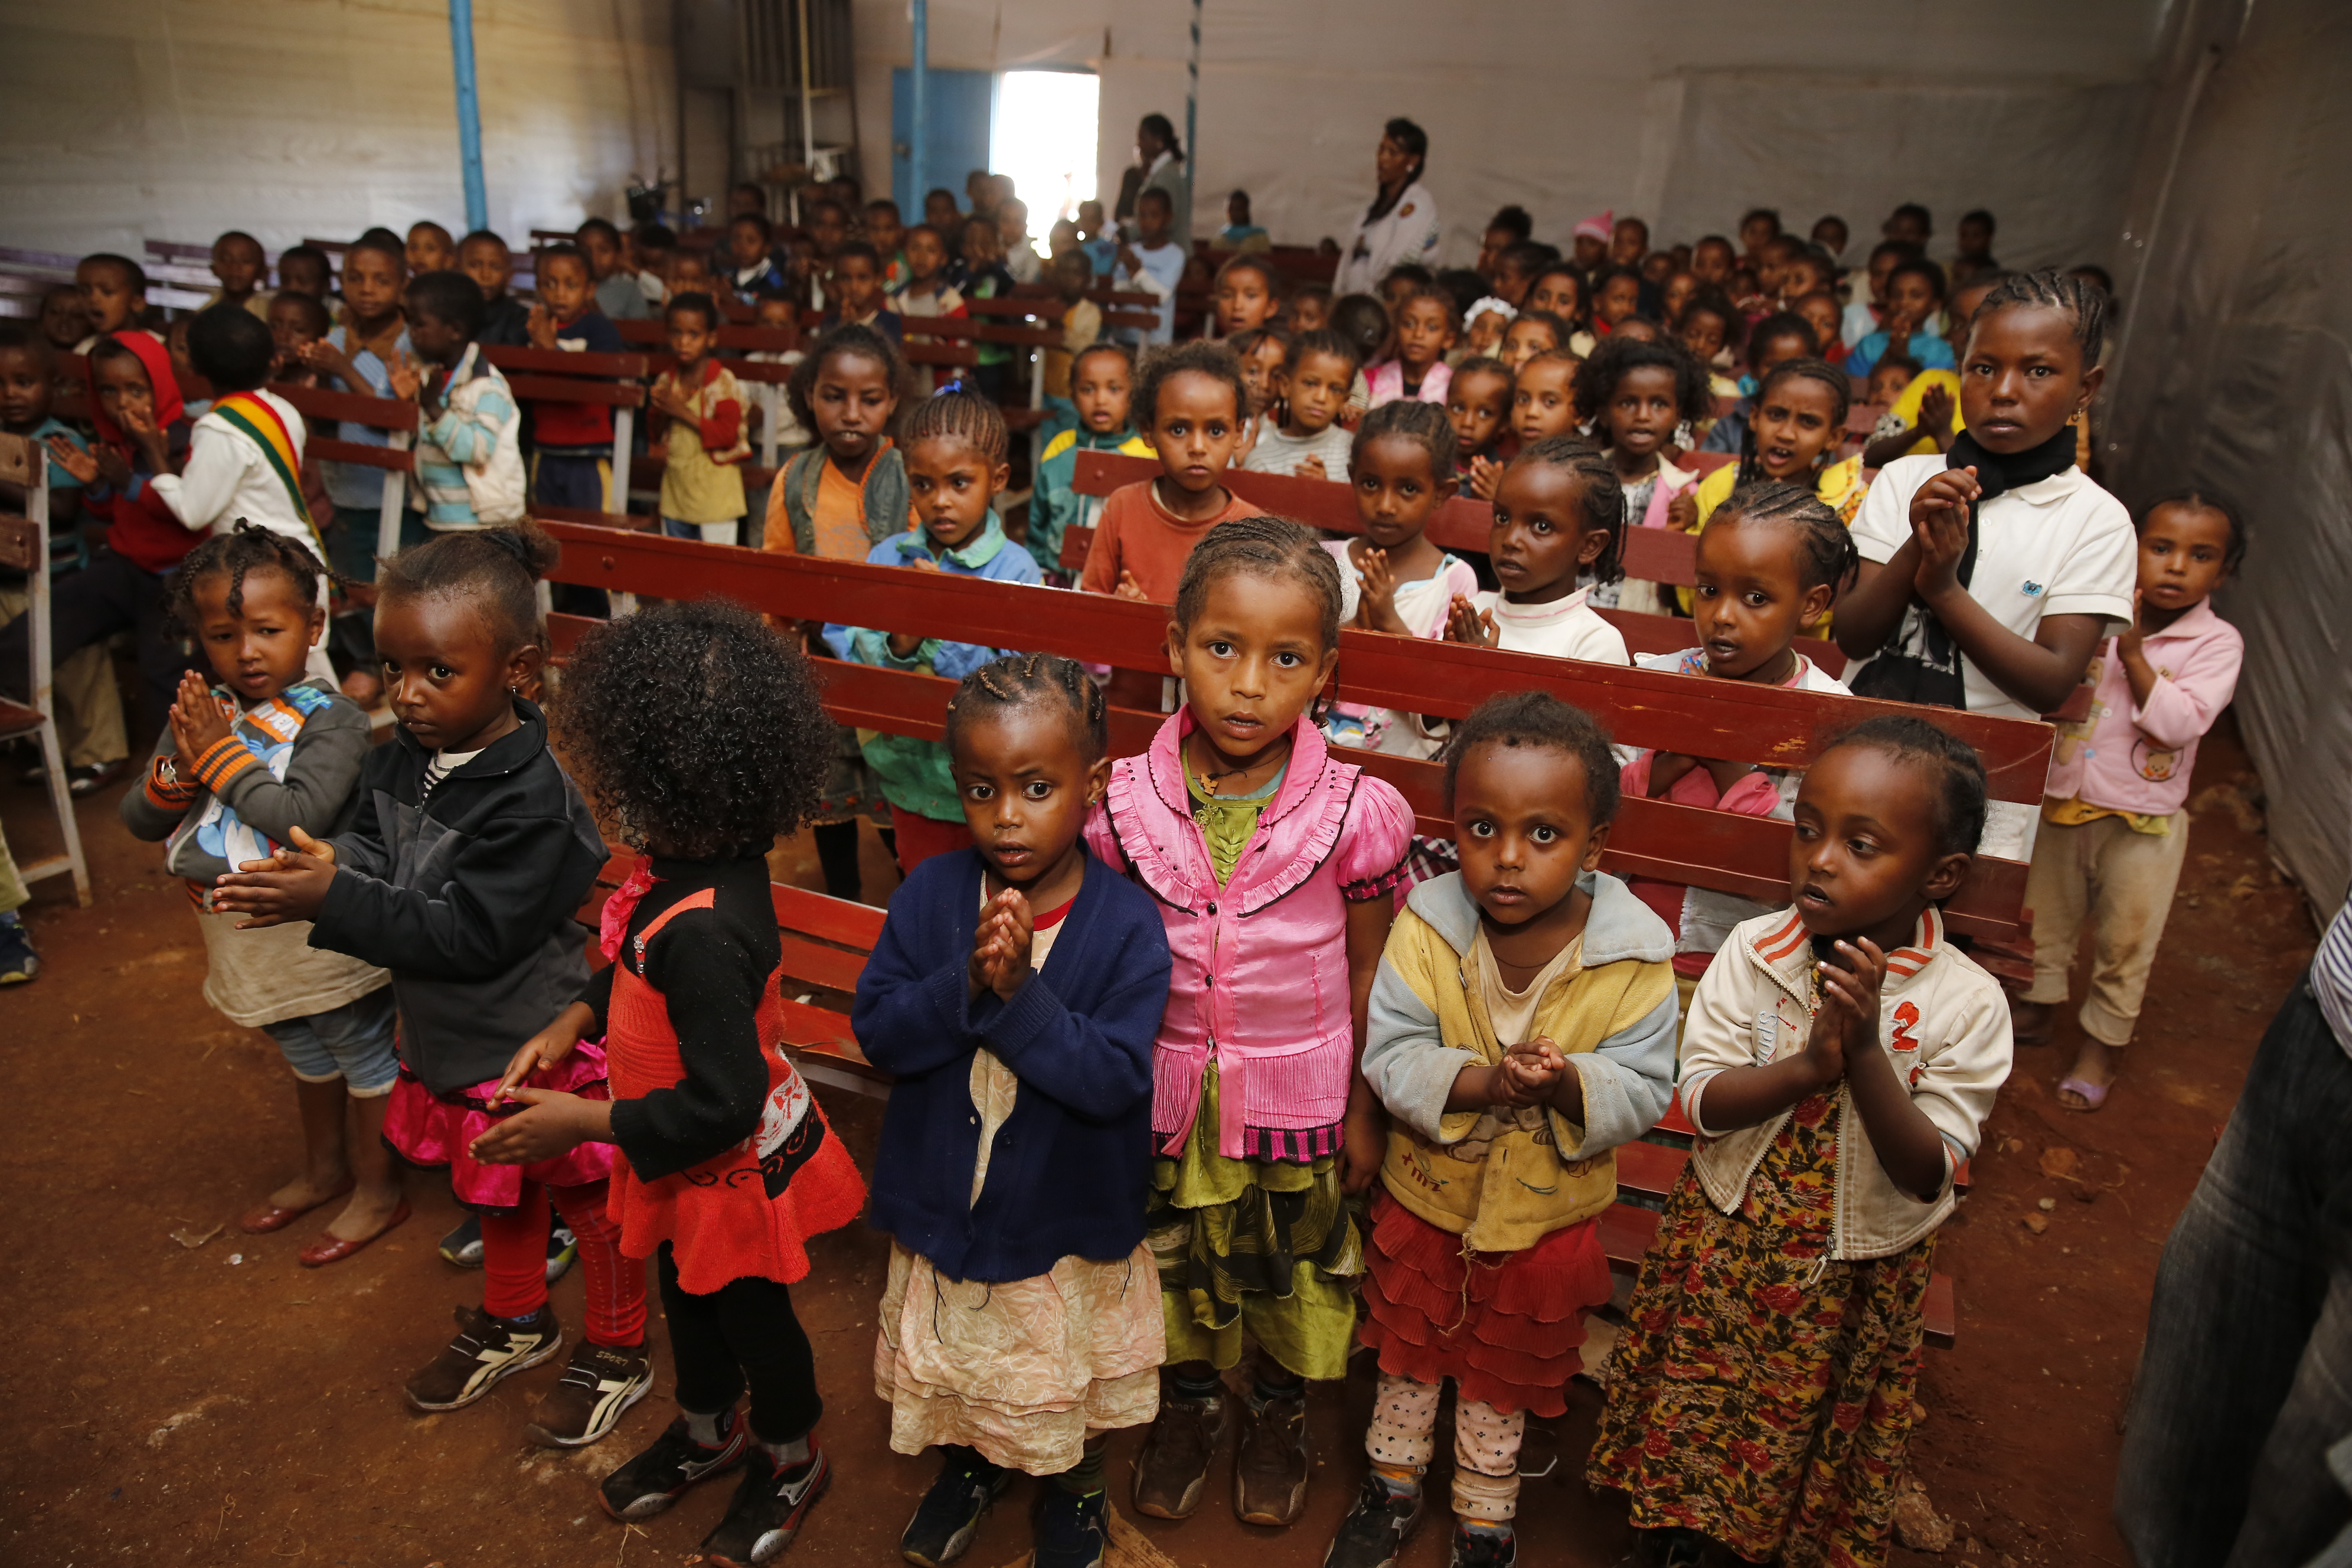 The children of our CarePoint site in Woliso, Ethiopia. We have 200 children who visit the site each day for food, shelter, clothing and emotional support. In 2014, we used social media to get our community to sponsor each of these kids until they are 18. 